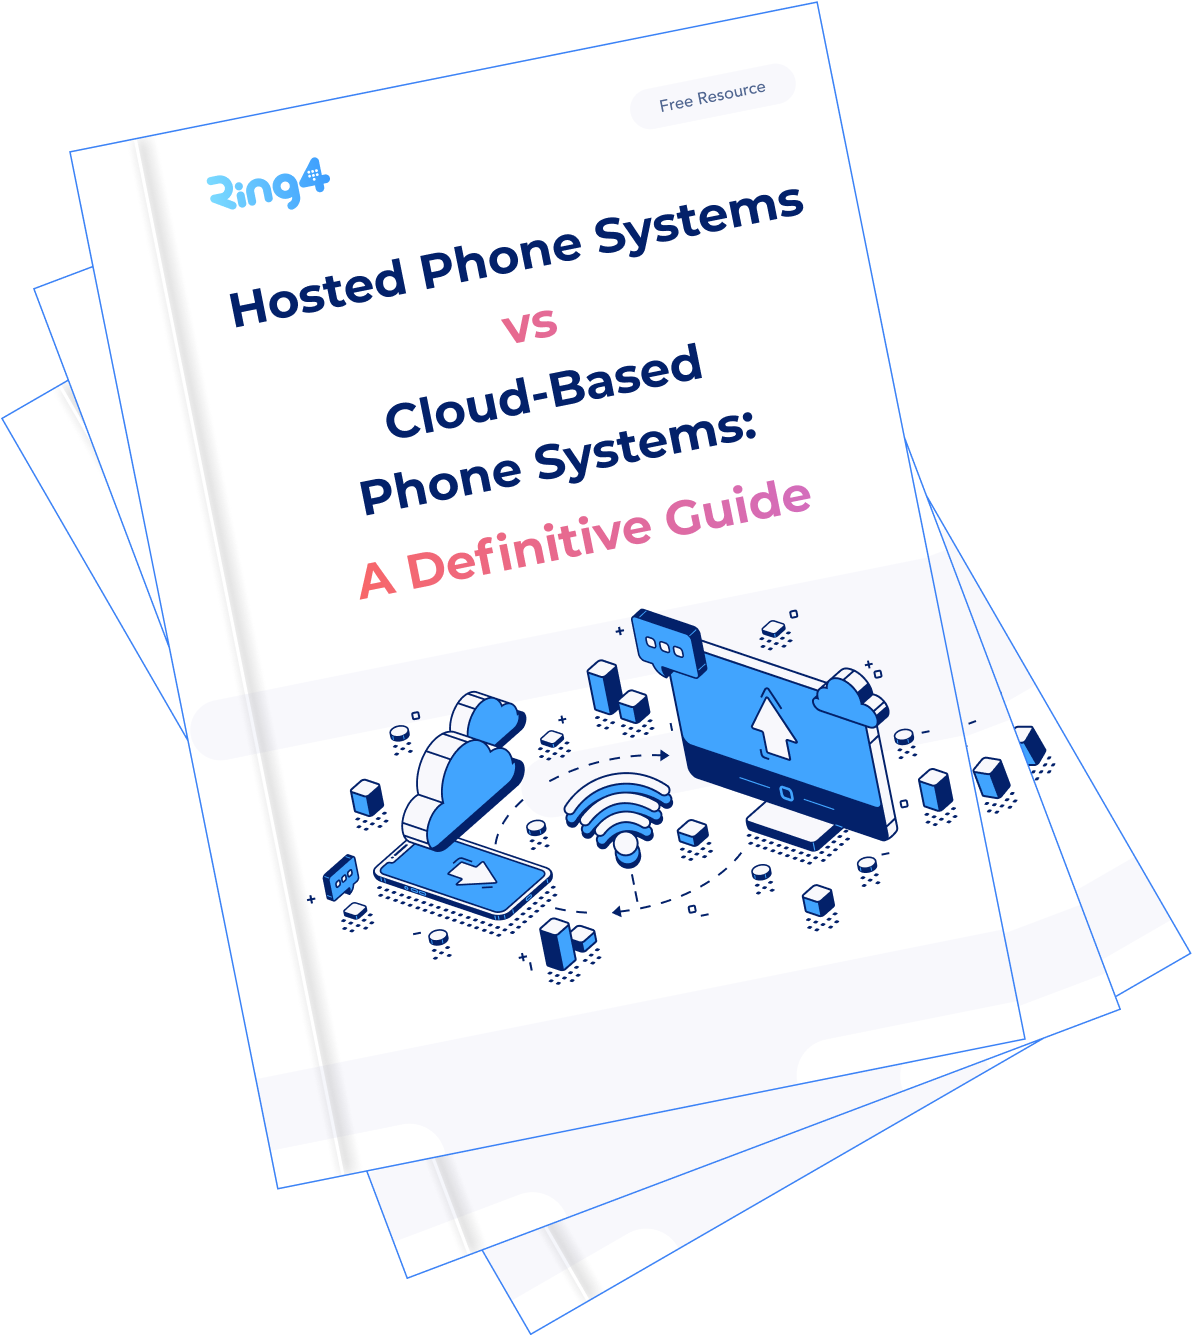 Hosted-Phone-Systems-vs-Cloud-Based-Phone-Systems-A-Definitive-Guide-covers